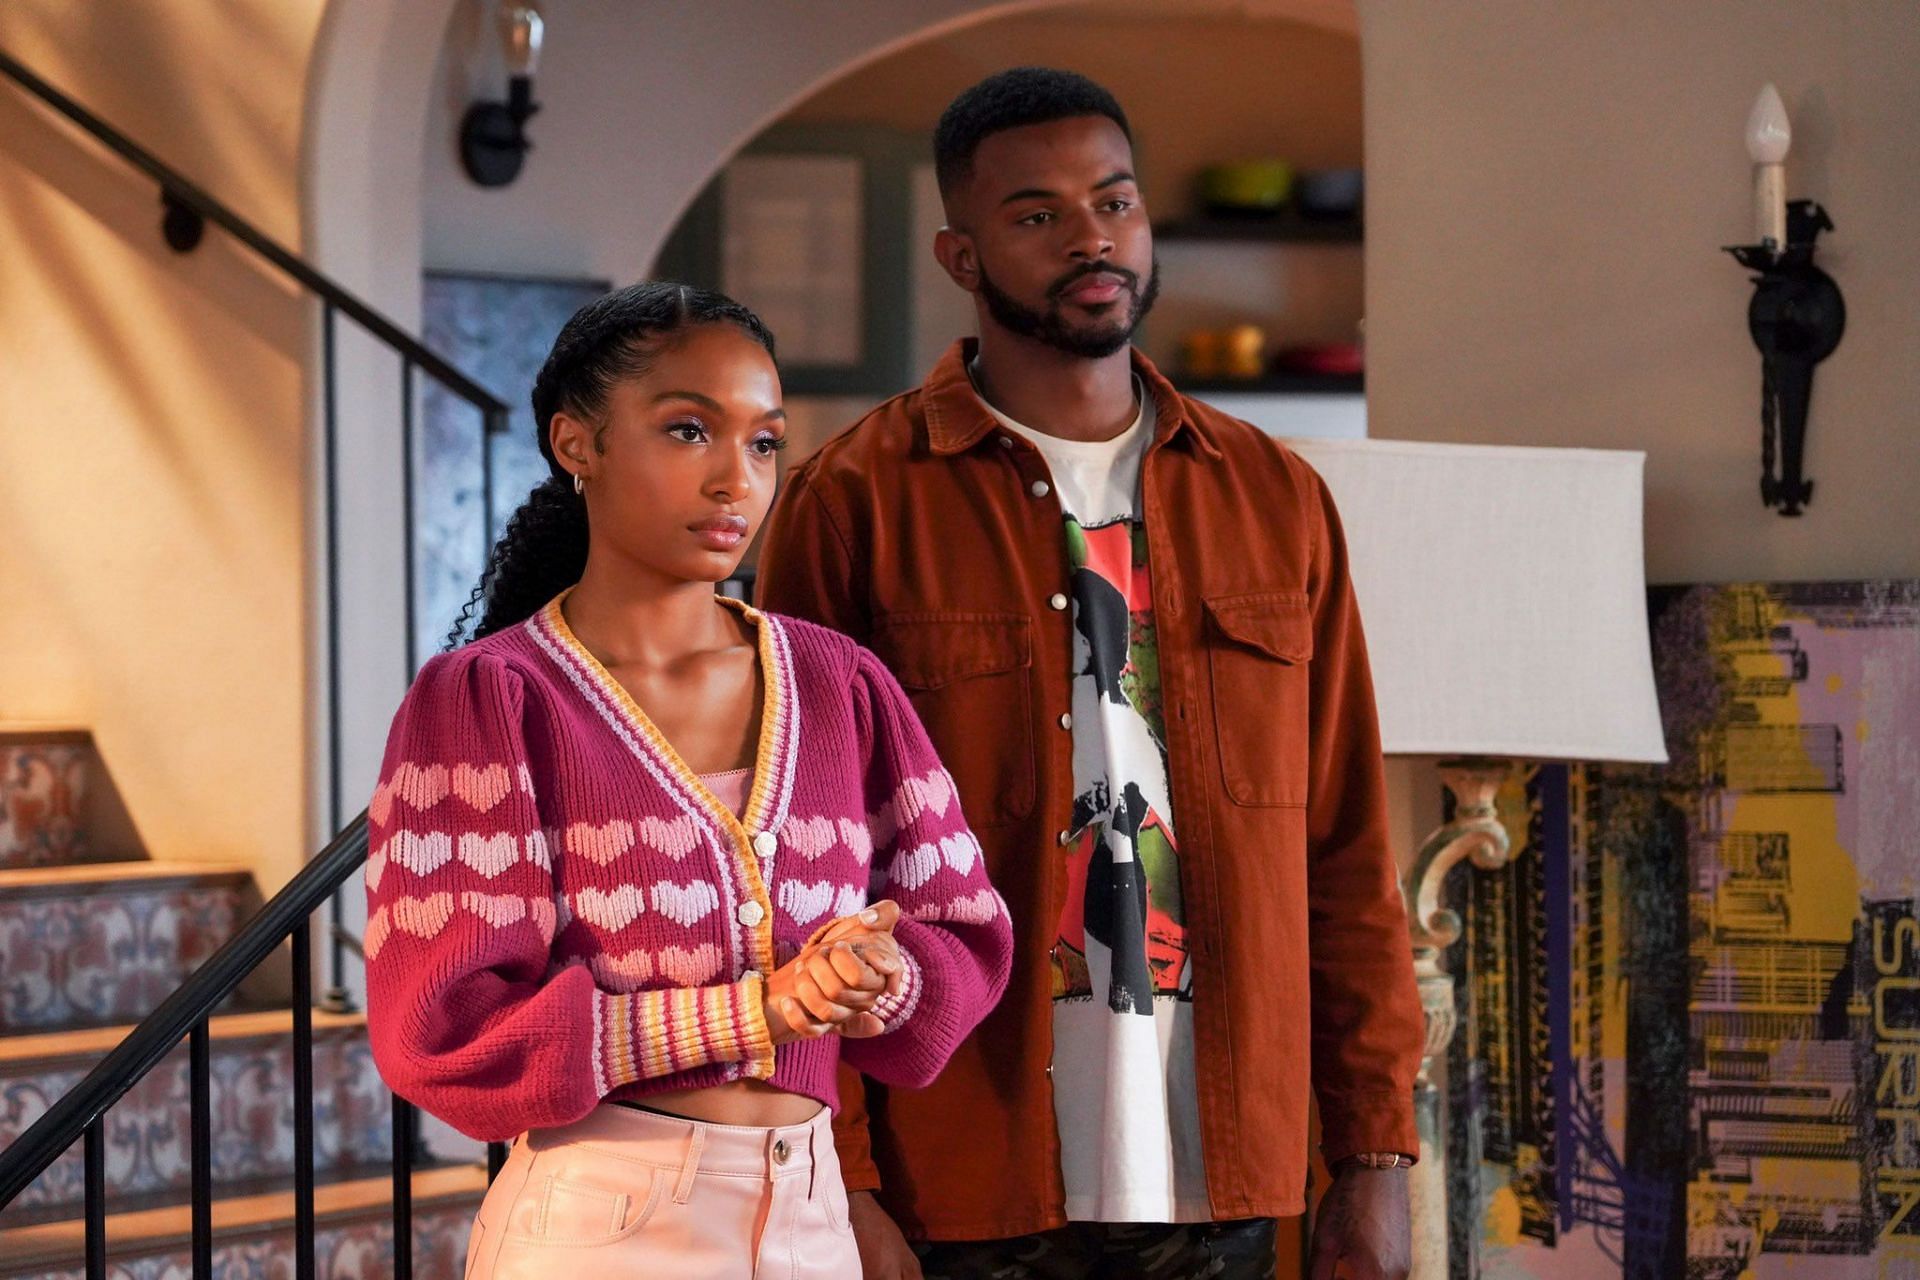 A still from Grown-ish. (Photo via Twitter/@mefeater)